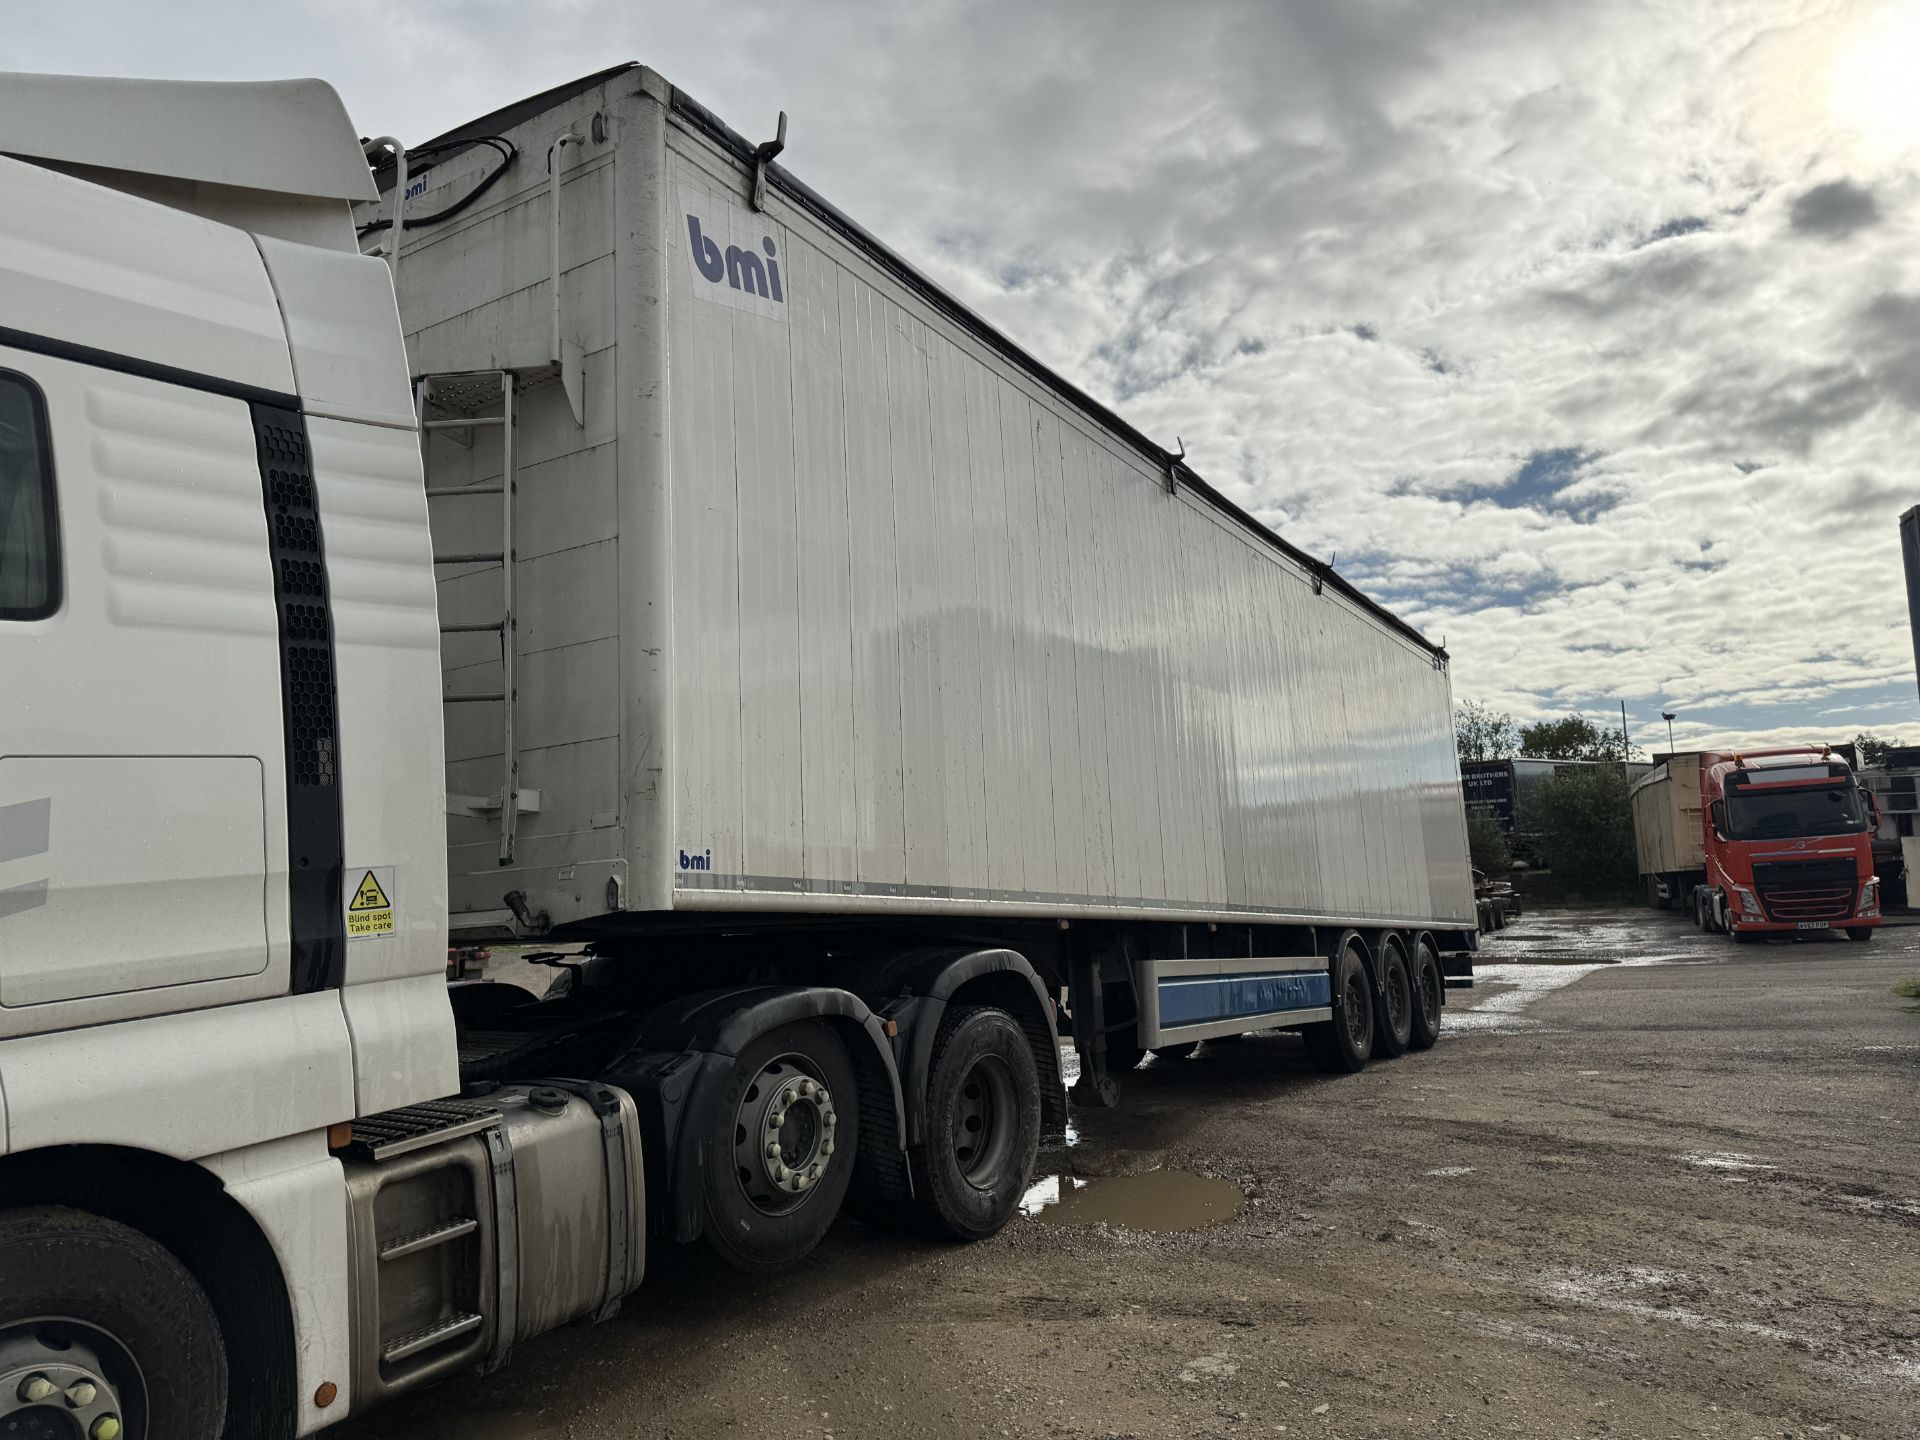 2017 - BMI Trailers Type AW 125, Tri Axle Air Suspension 125 Yard Cargo Floor Trailer - Image 7 of 46